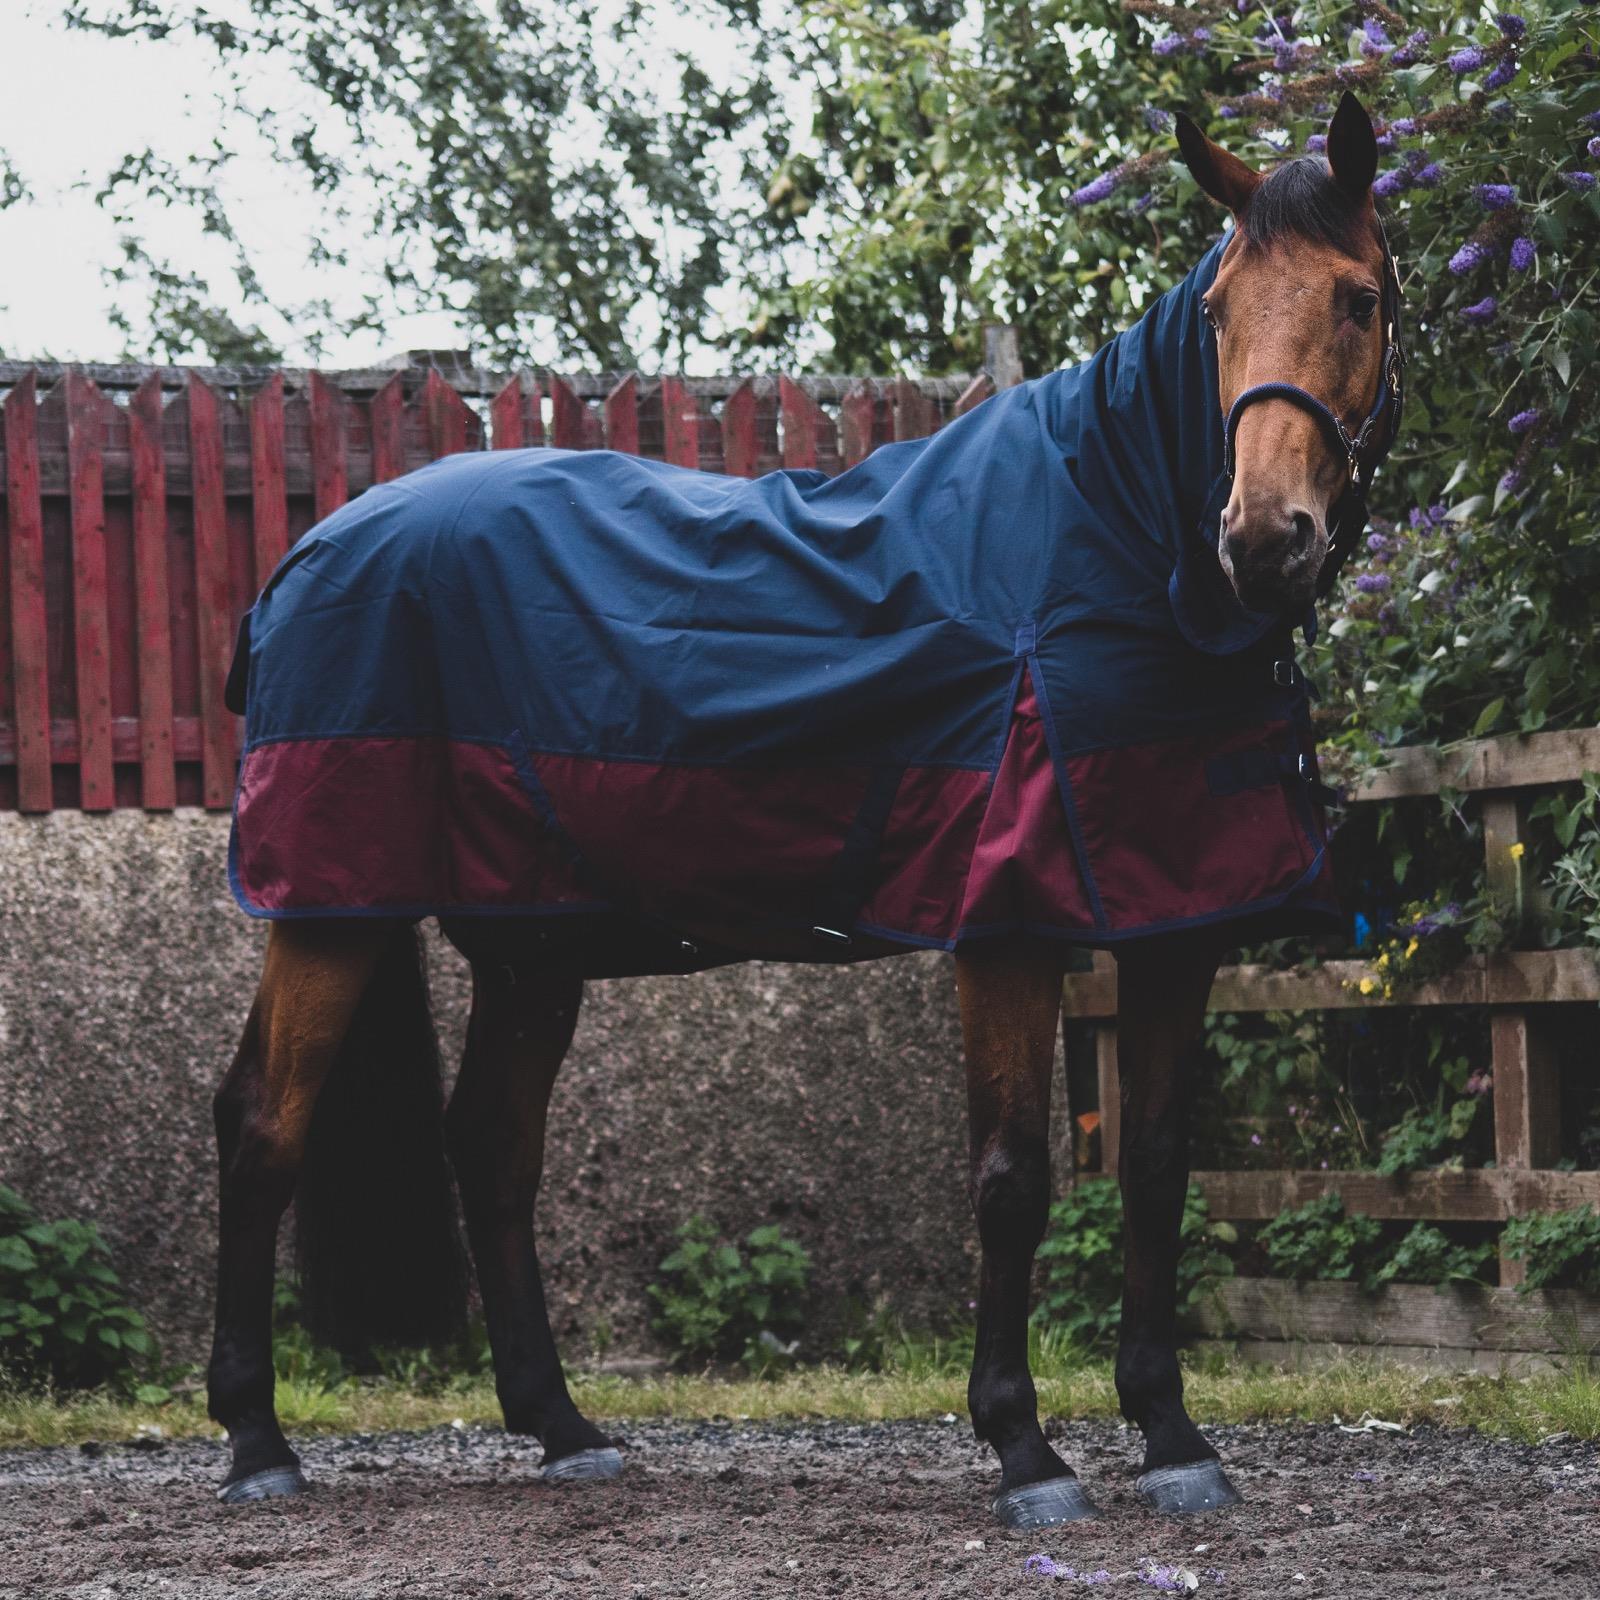 1200D Outdoor Winter Turnout Horse Rugs 50G Fill COMBO Full Neck Navy/Burgundy 5'3-6'9